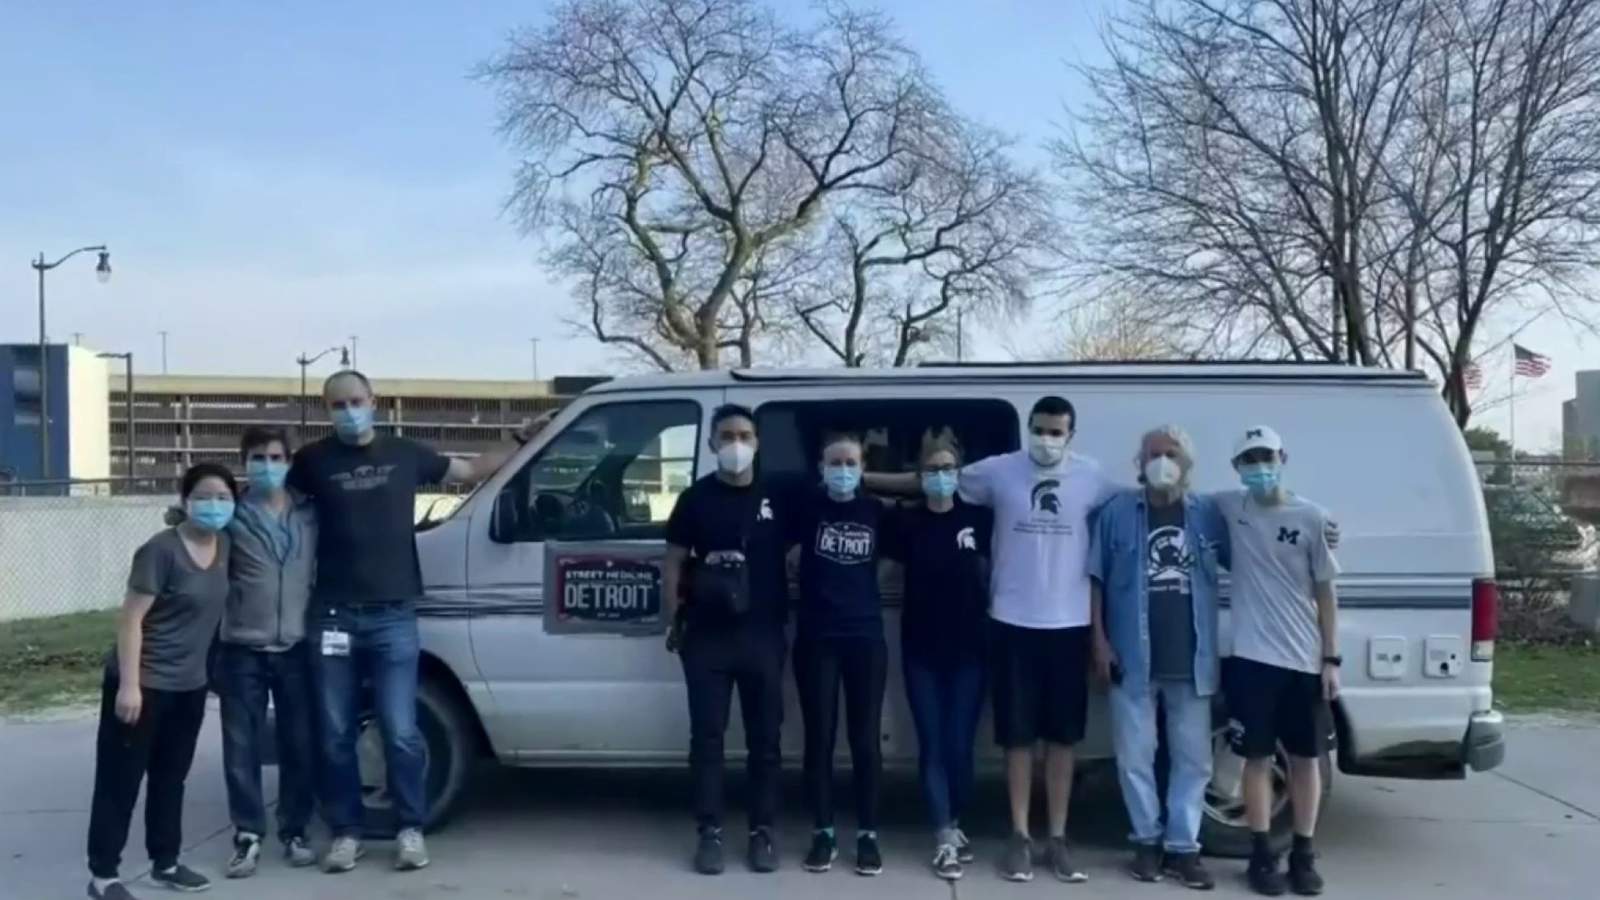 Michigan medical school students work to vaccinate homeless